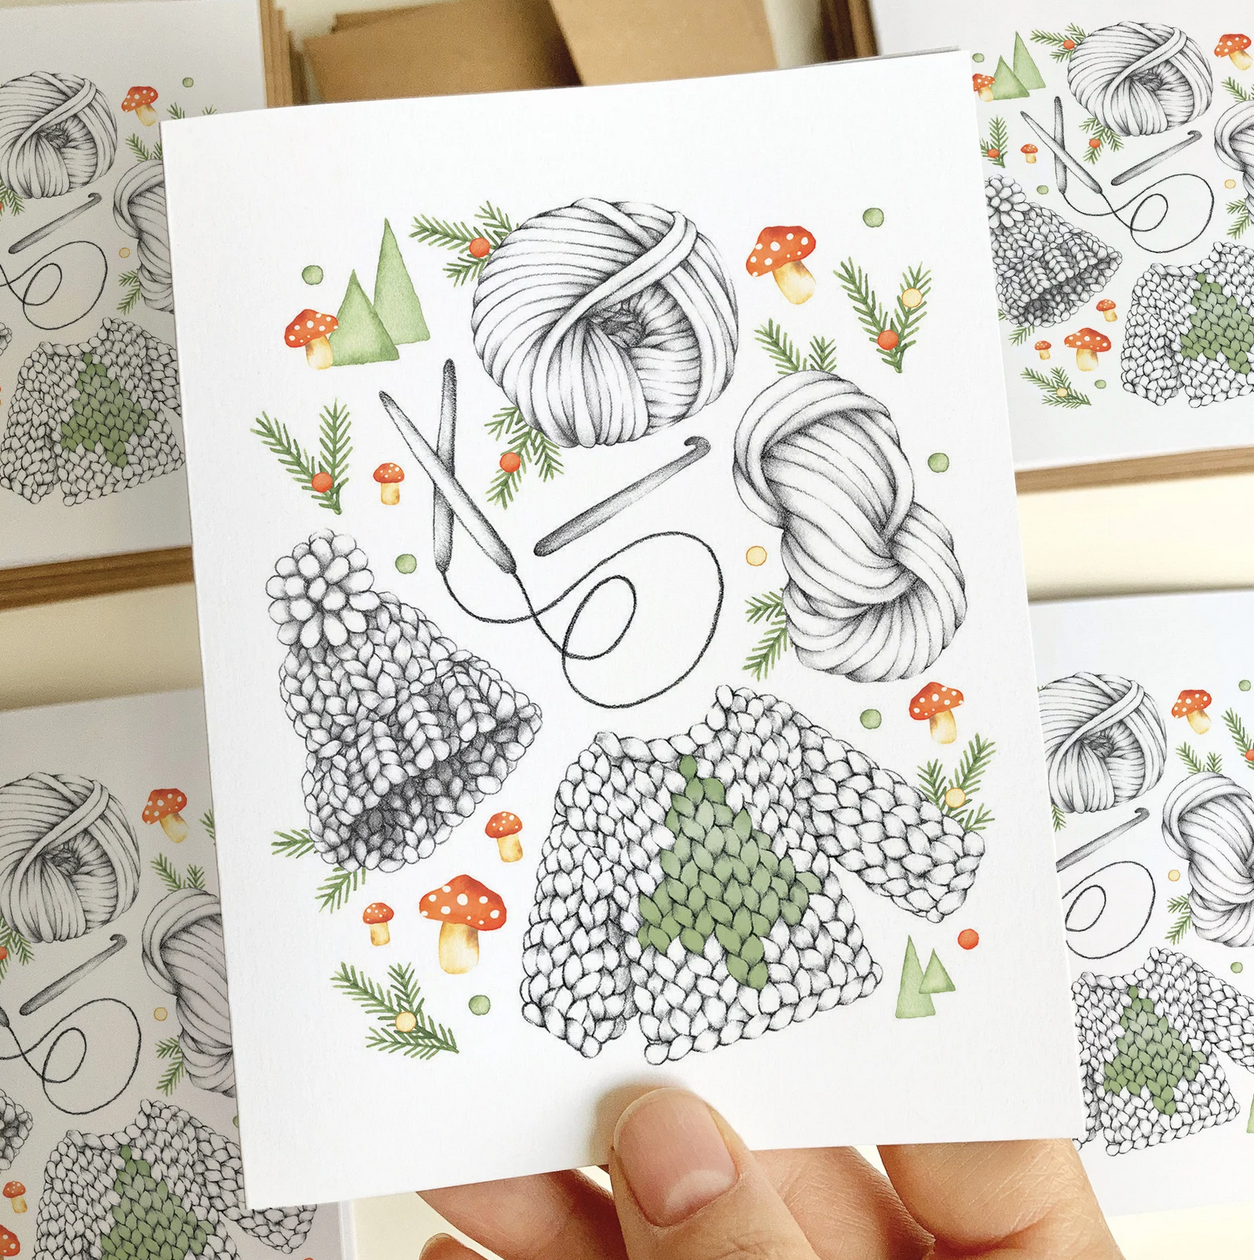 Load image into Gallery viewer, Katrinn Pelletier Illustration | Greeting Cards
